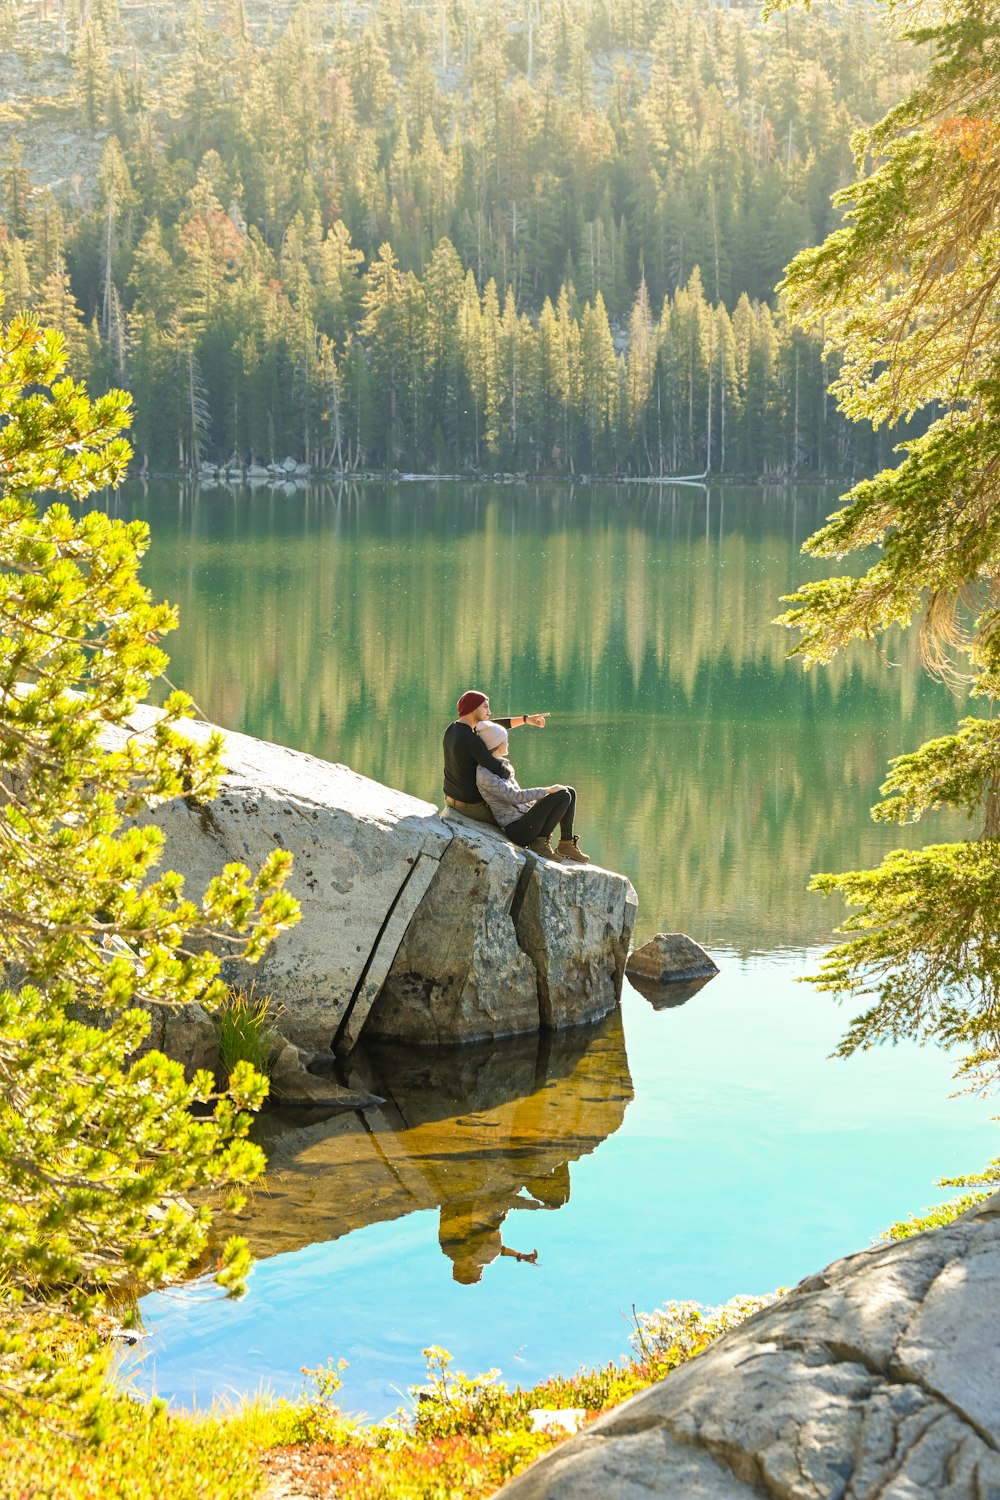 a person sitting on a rock by a lake with trees and hills in the background